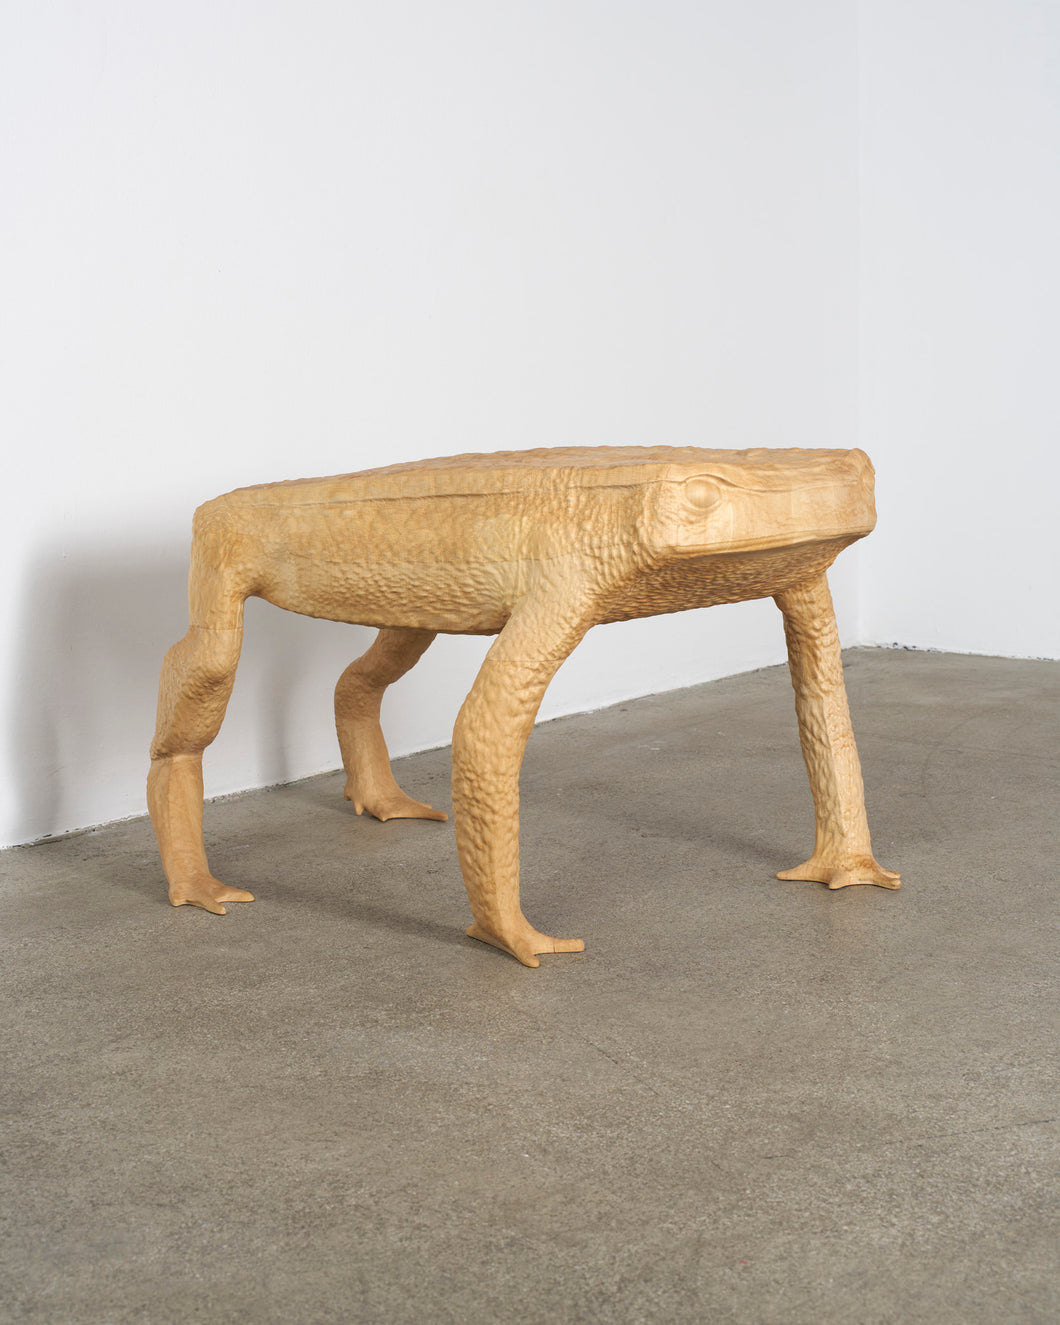 Oliver Laric, Krötentisch (Toad Table)